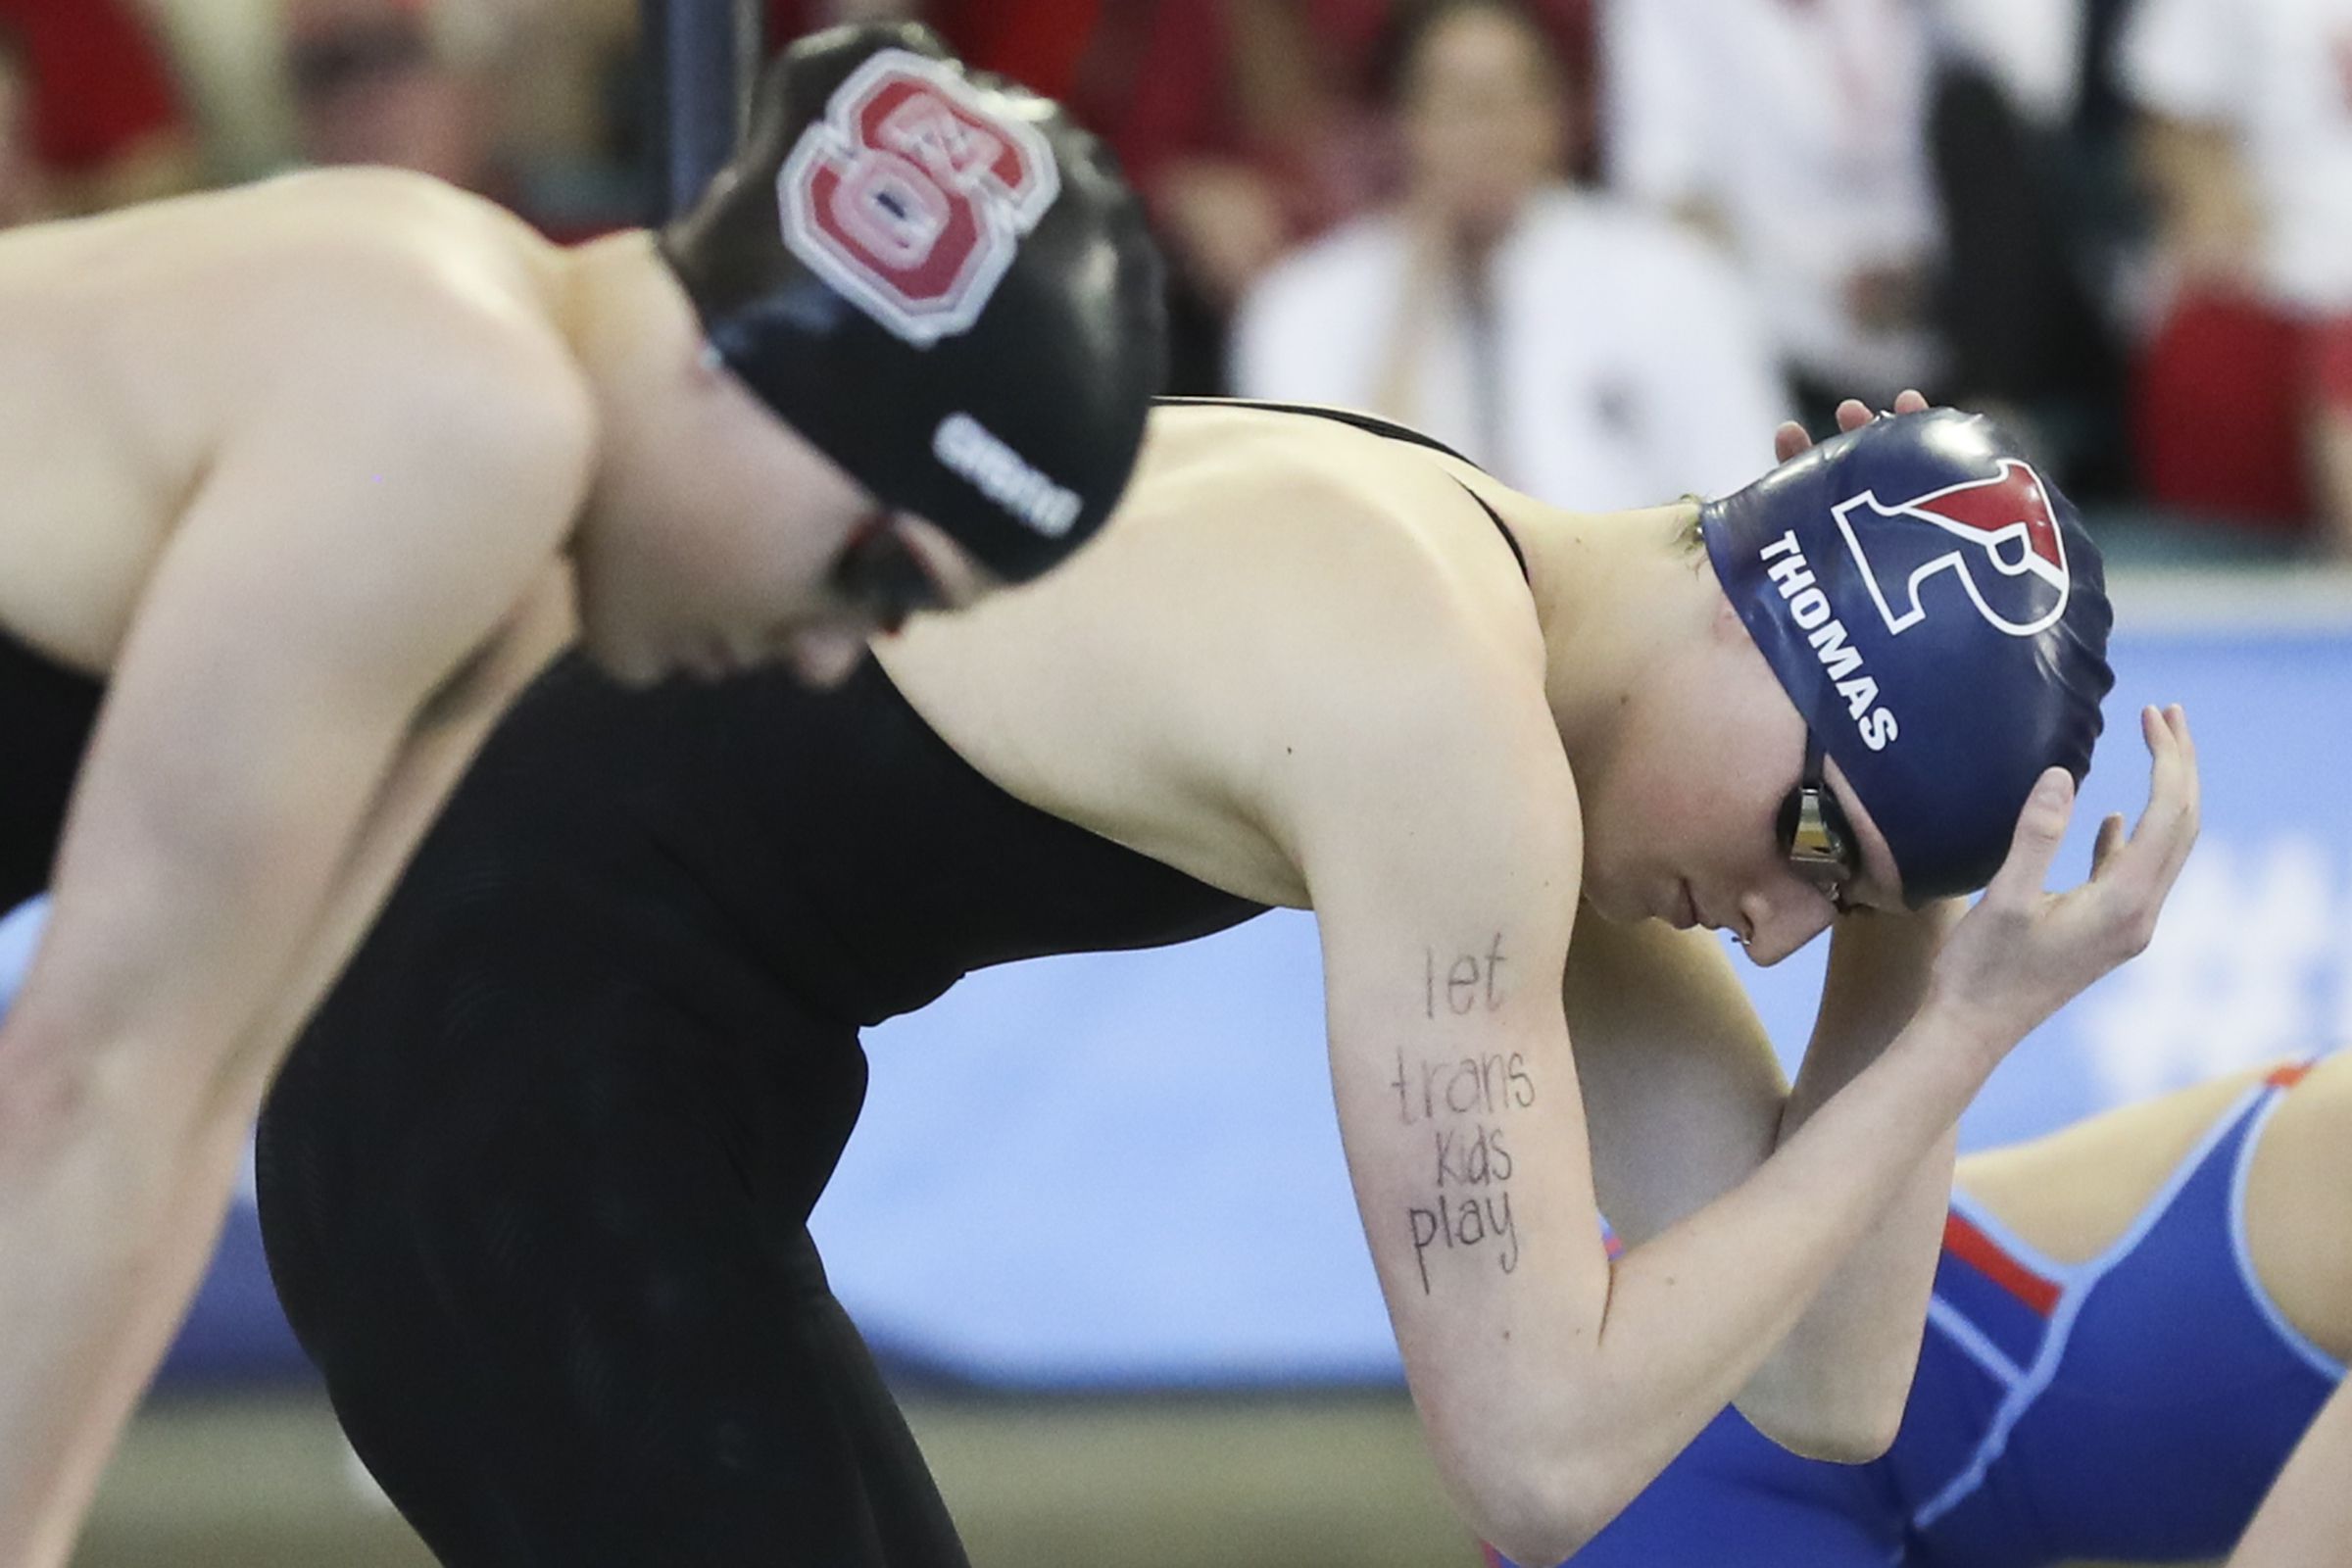 Kentucky's Riley Gaines says NCAA needs to 'make changes' to rules that  allowed transgender swimmer Lia Thomas to compete at national championships  